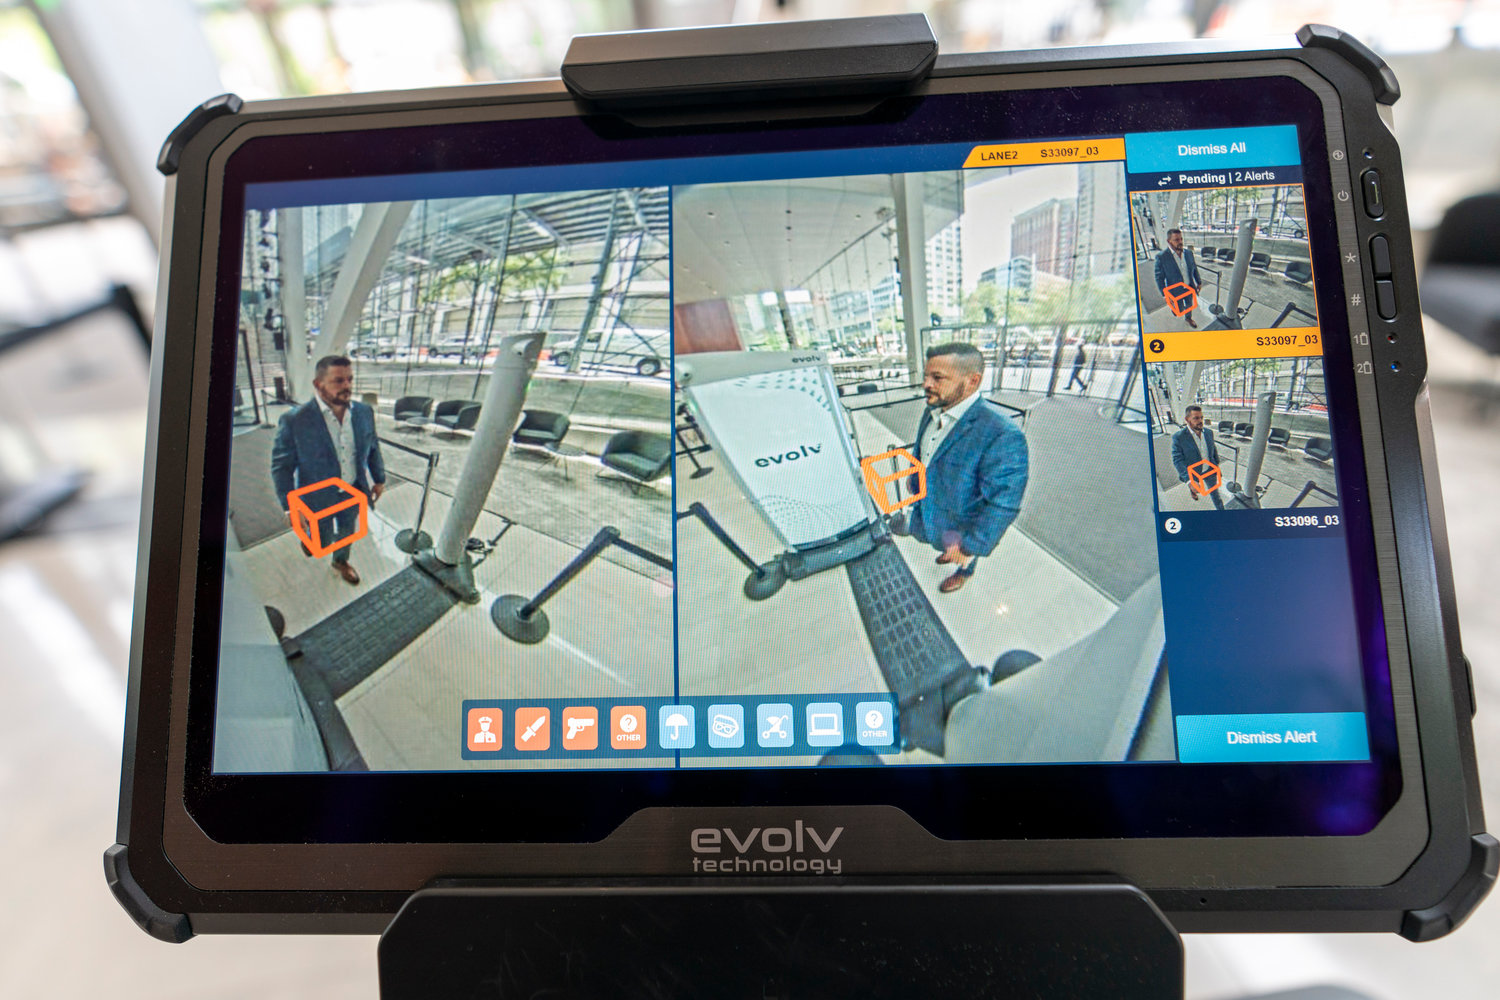 The Evolv Express weapons detection system flags a weapon that Dominck D’Orazio, Evolv Technology account executive, wears on his hip while demonstrating the system, Wednesday, May 25, 2022, in New York City.